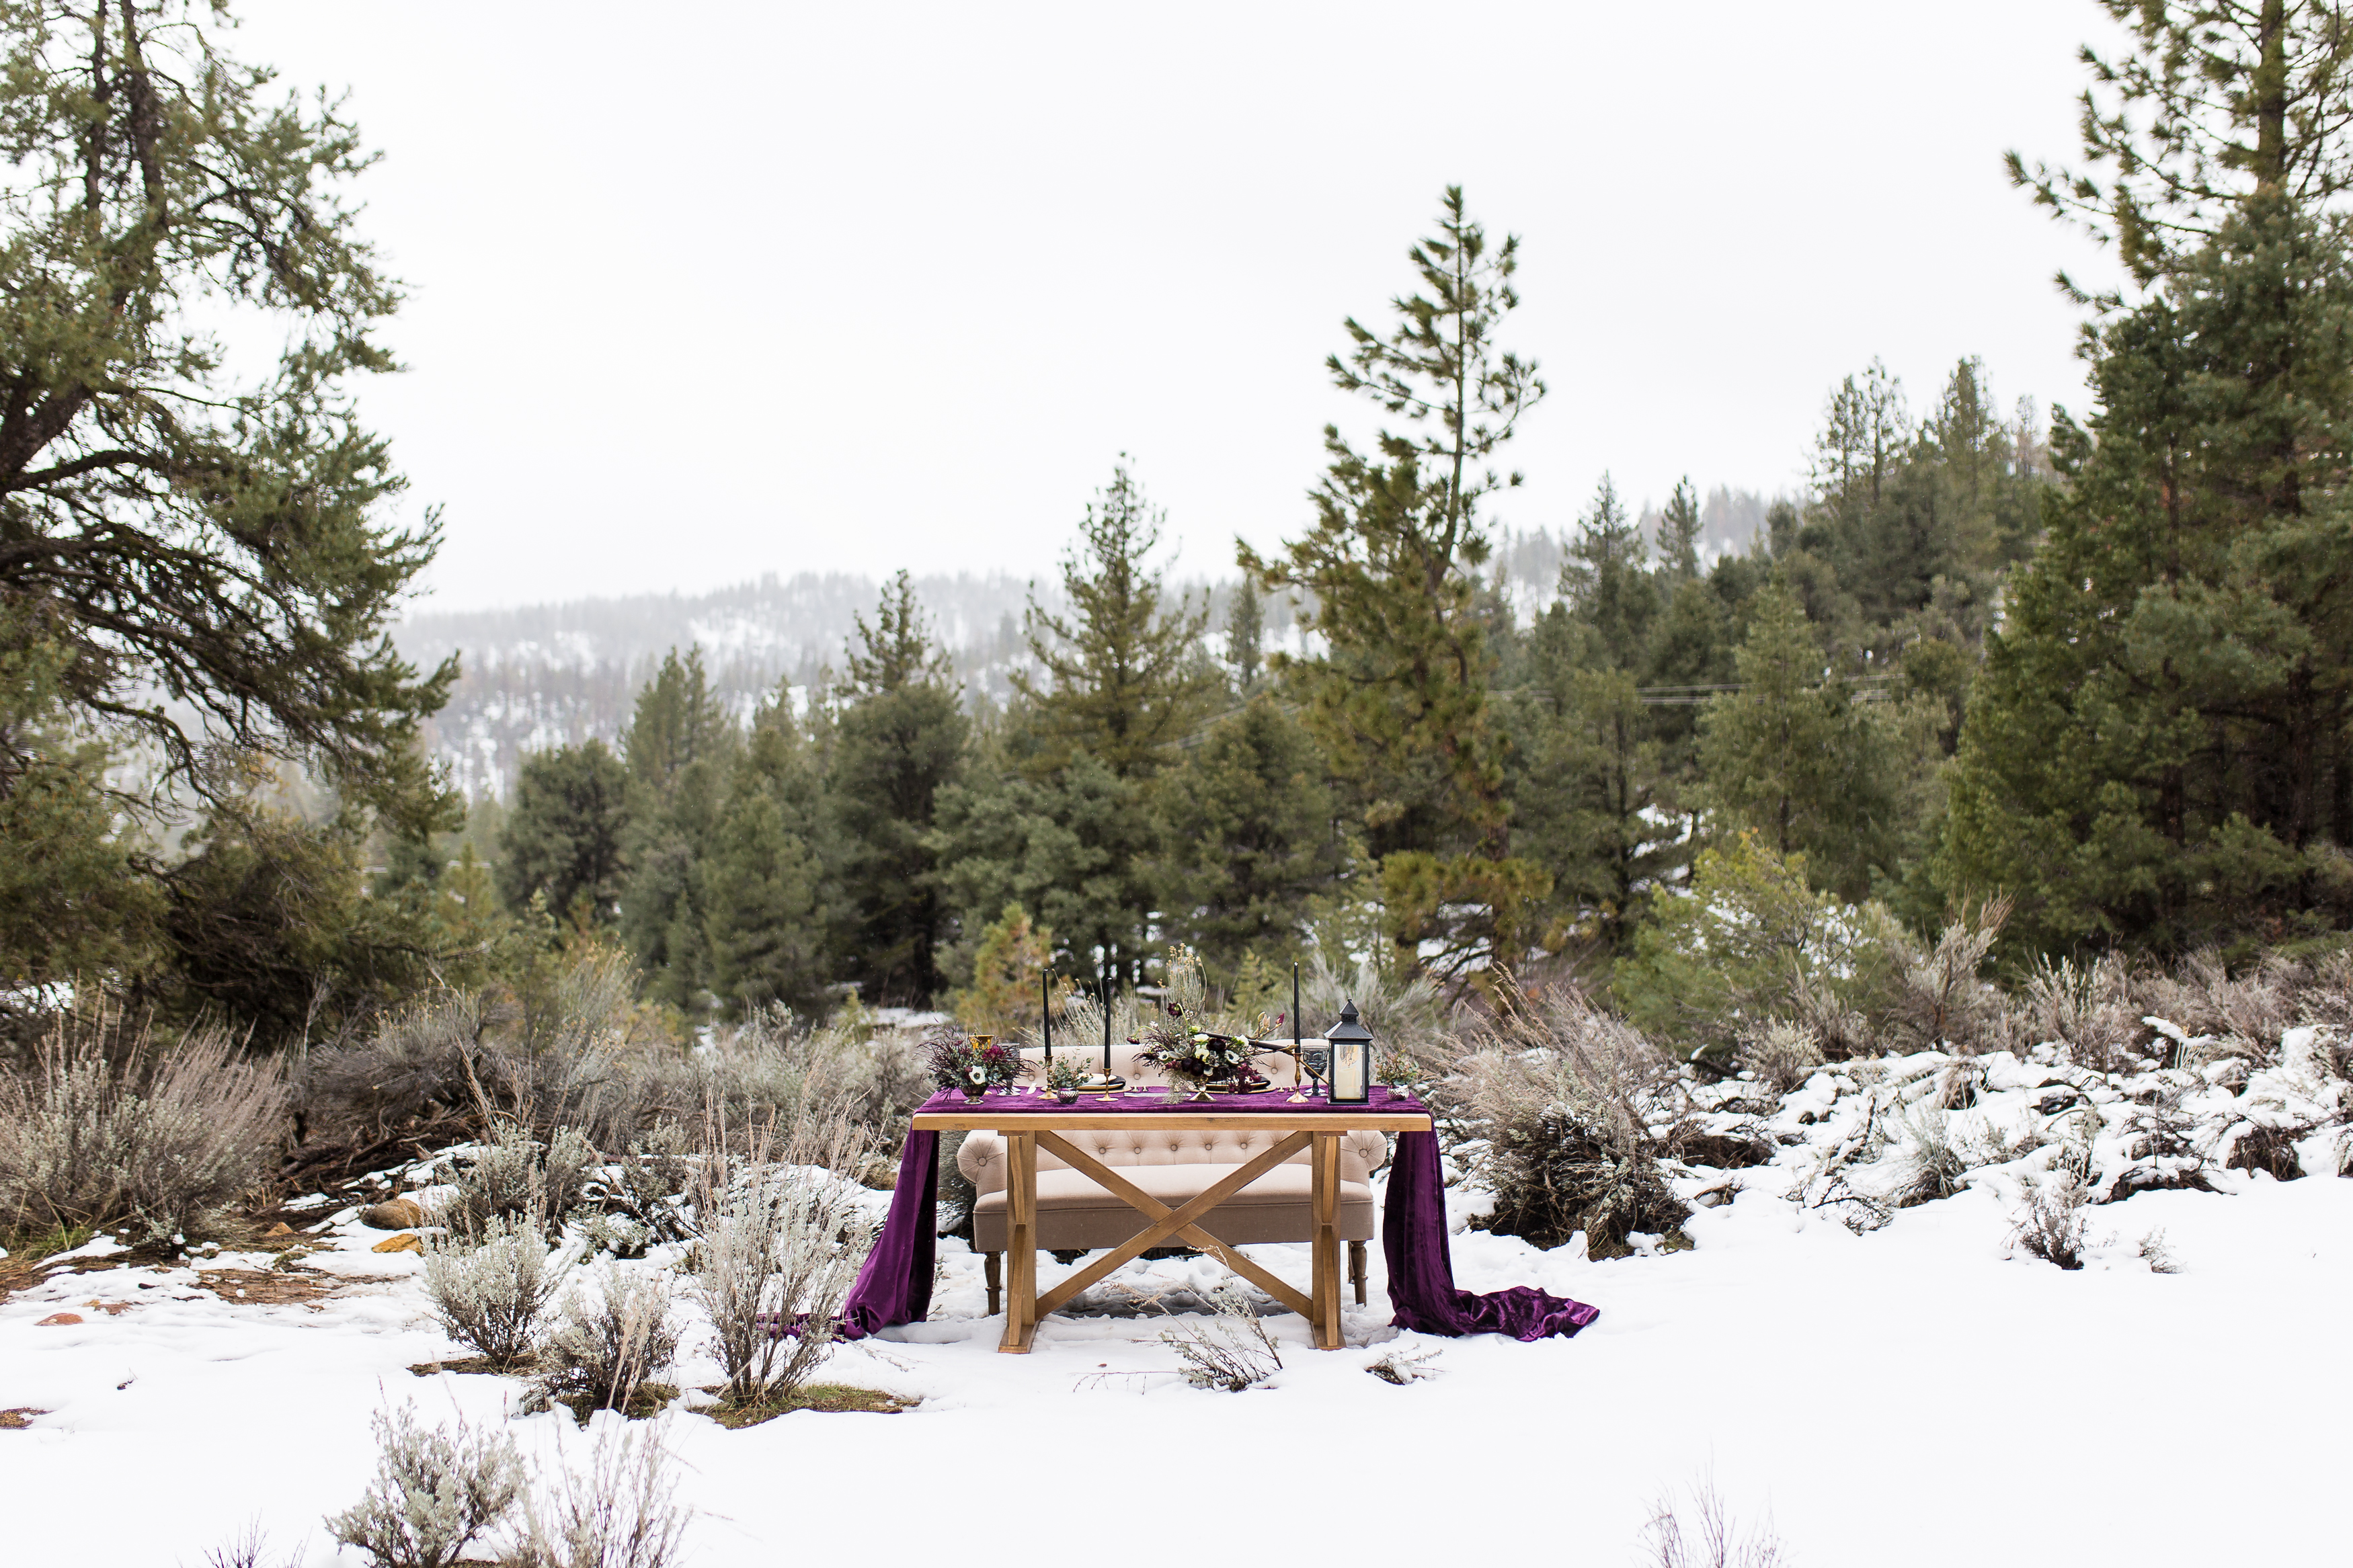 Sweetheart table in snow in Frazier Park, photographed by Stefani Ciotti